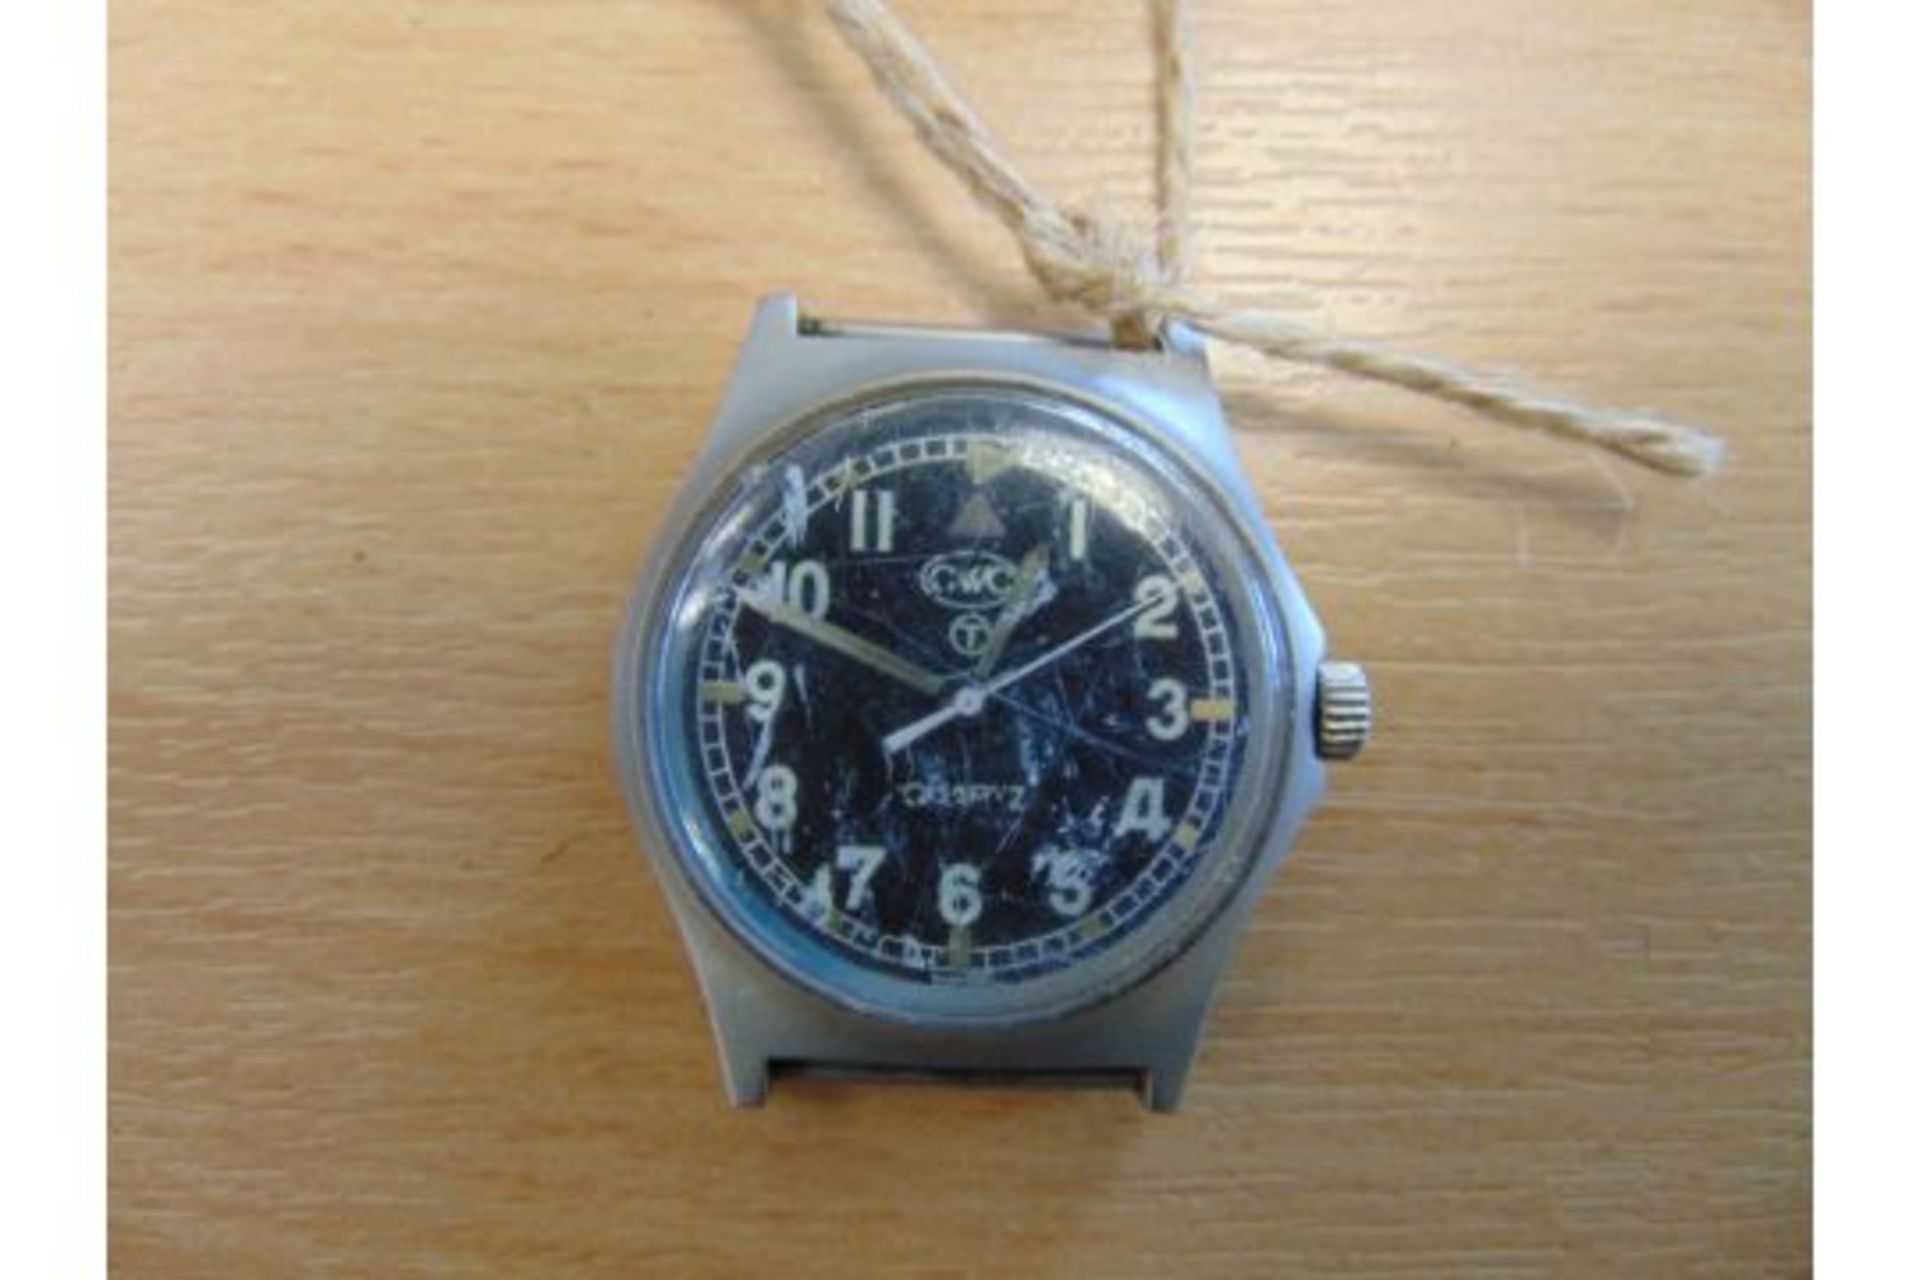 Rare CWC (Cabot Watch Co Switzerland) 0552 Royal Marines / Navy Issue FAT BOY Service Watch - Image 2 of 3